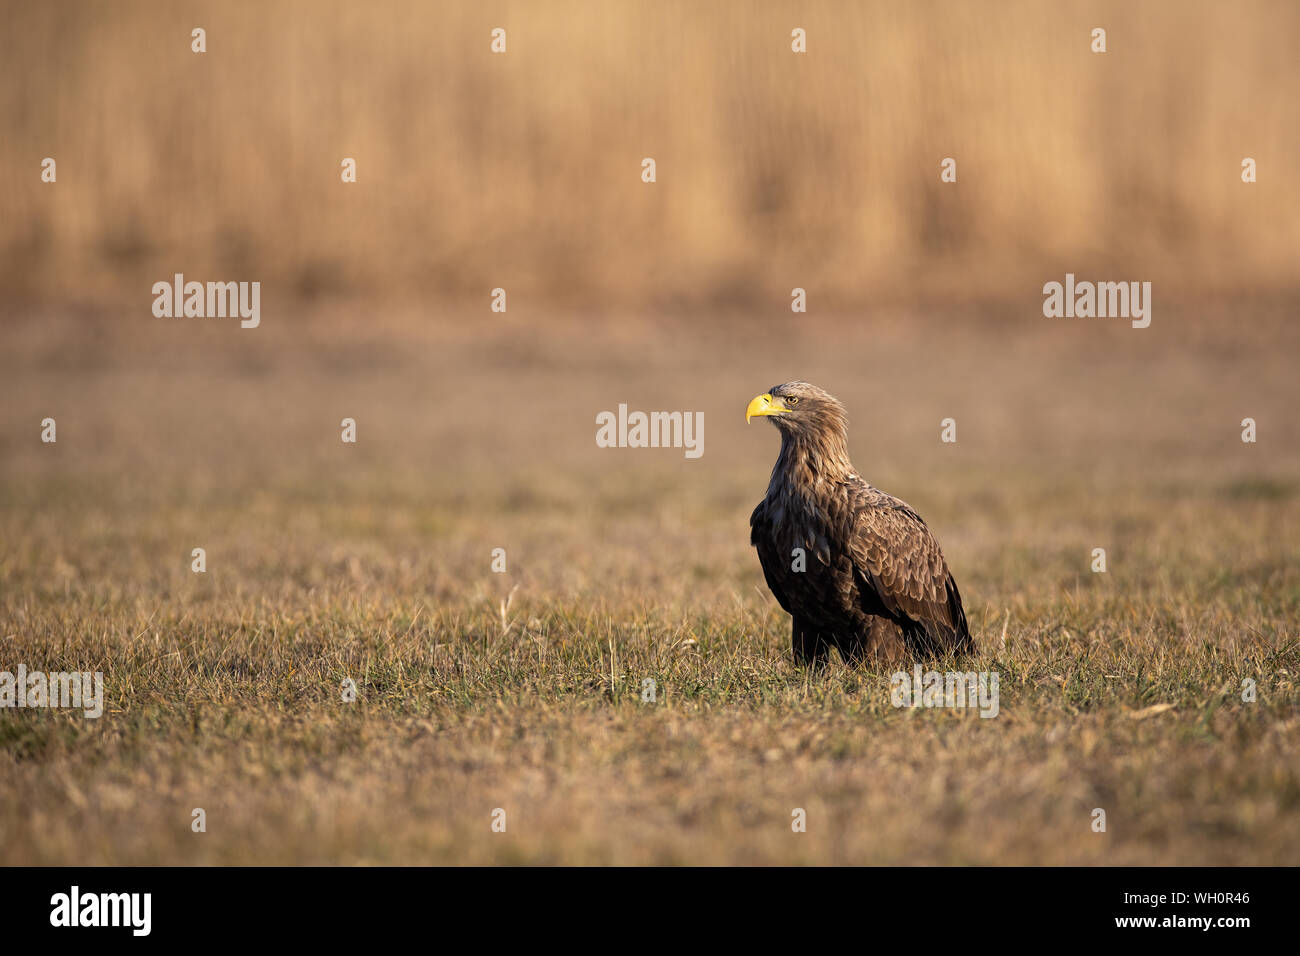 Adult white-tailed eagle sitting on the ground at sunrise with copy space Stock Photo